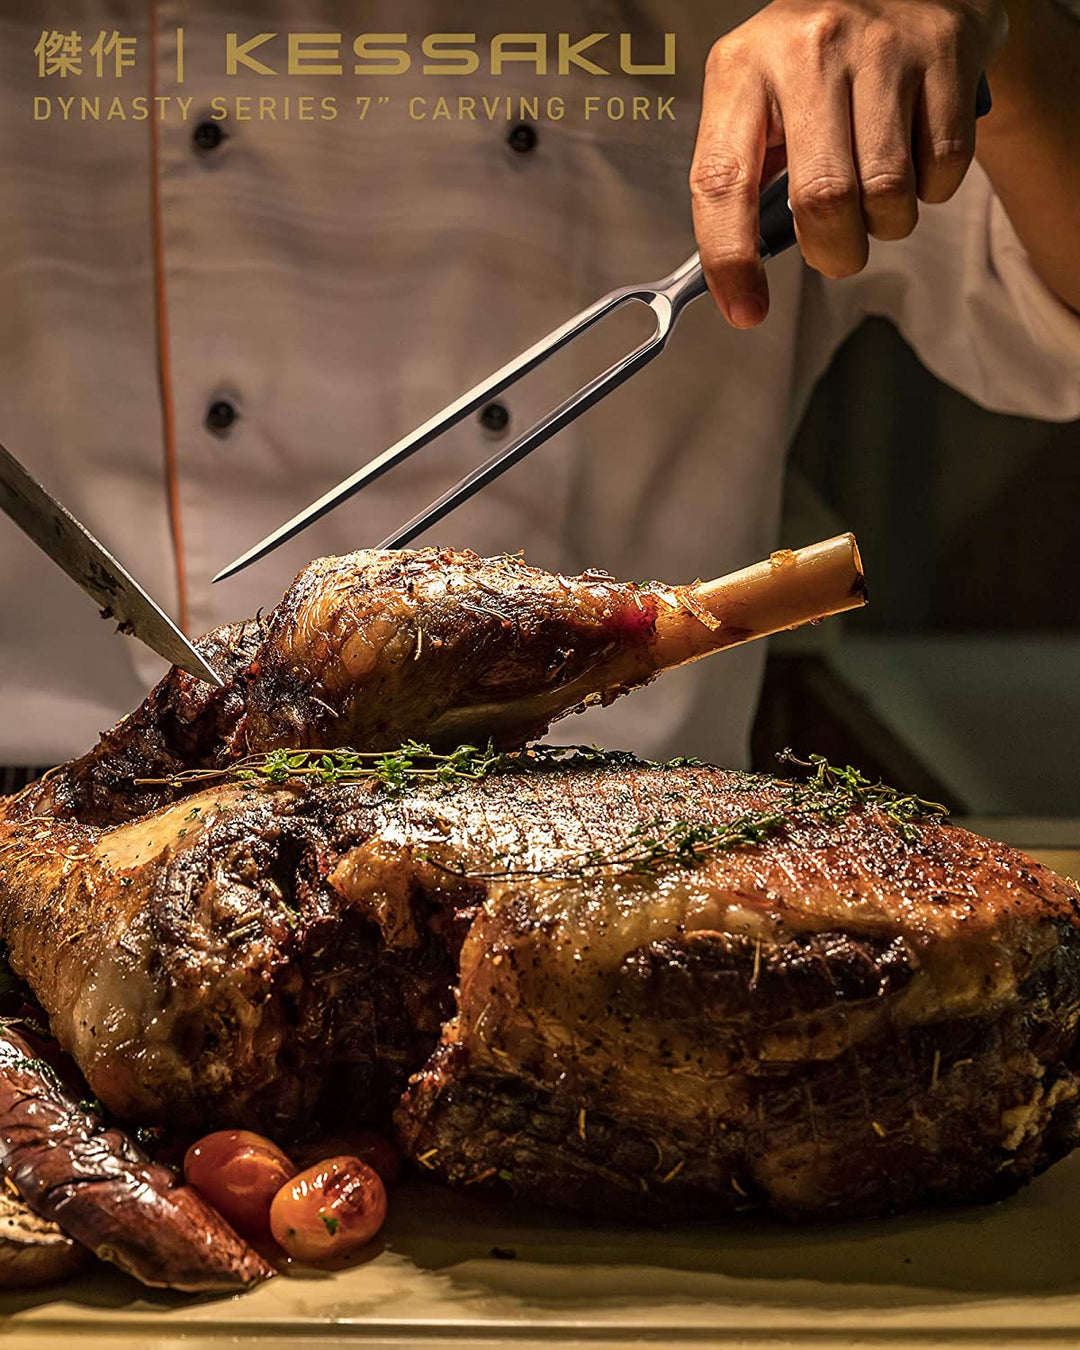 A chef gets ready to carve a turkey using the Dynasty Carving Fork